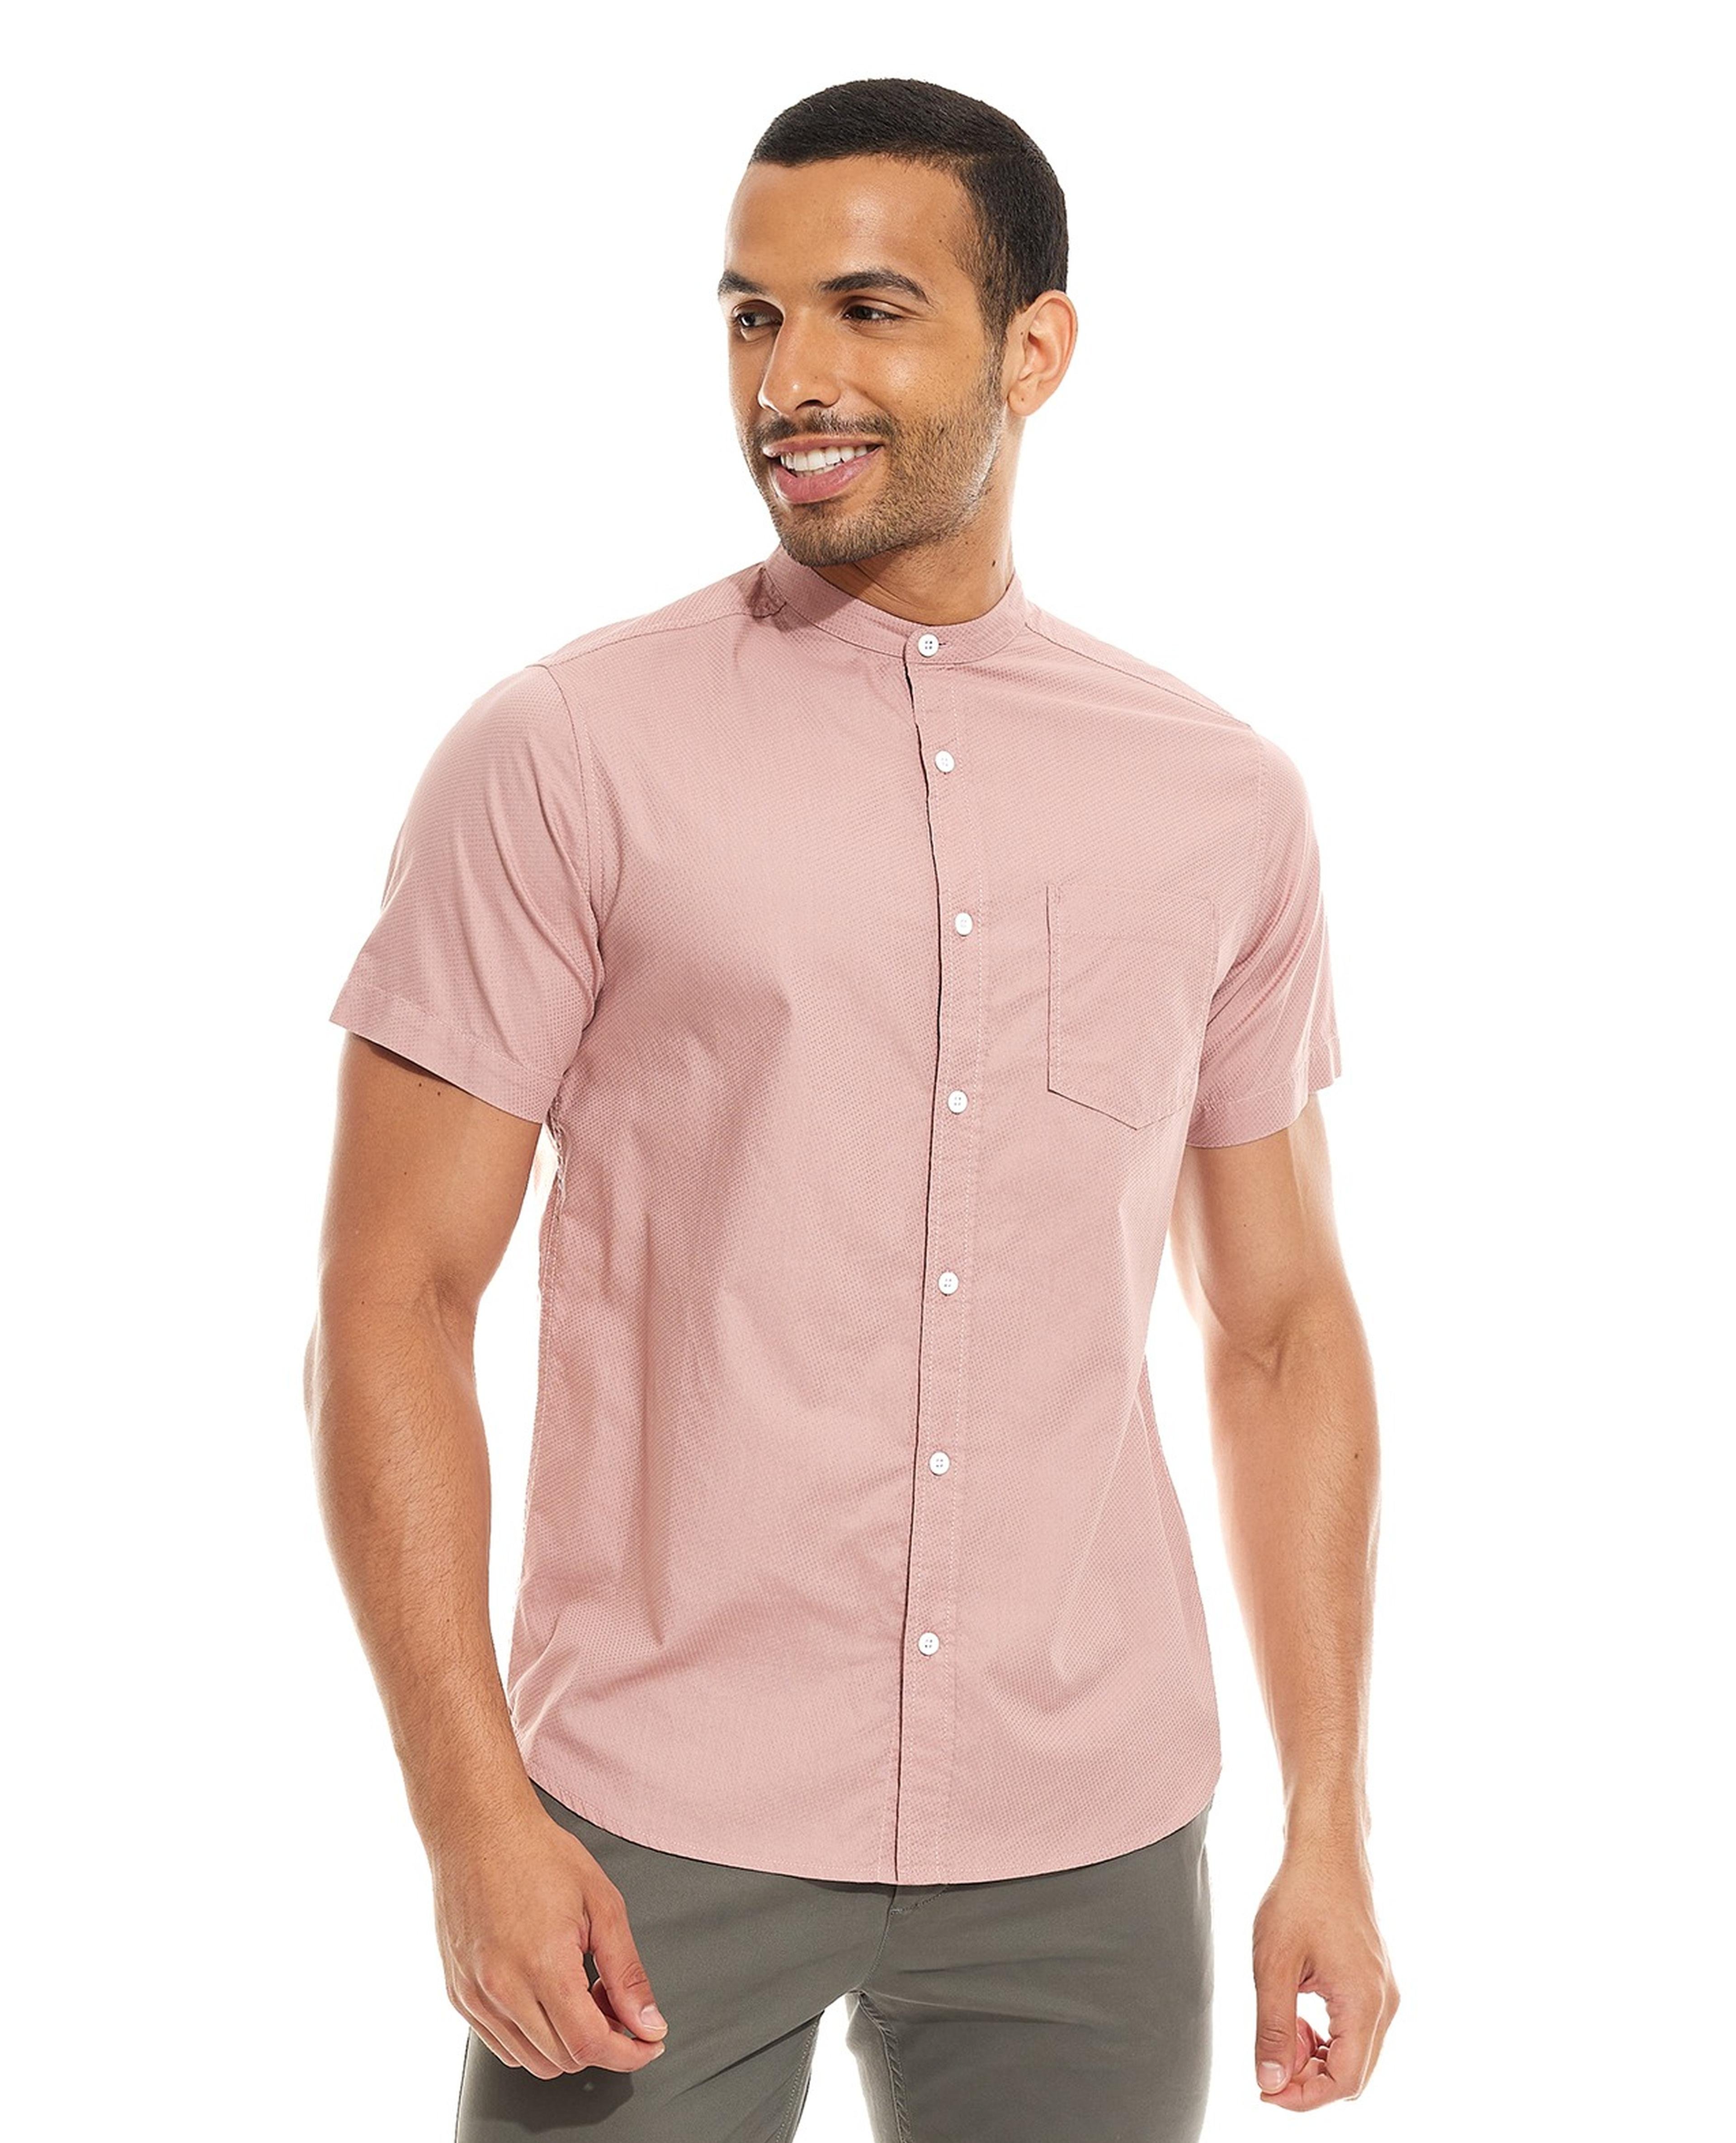 Solid Shirt with Stand Collar and Short Sleeves